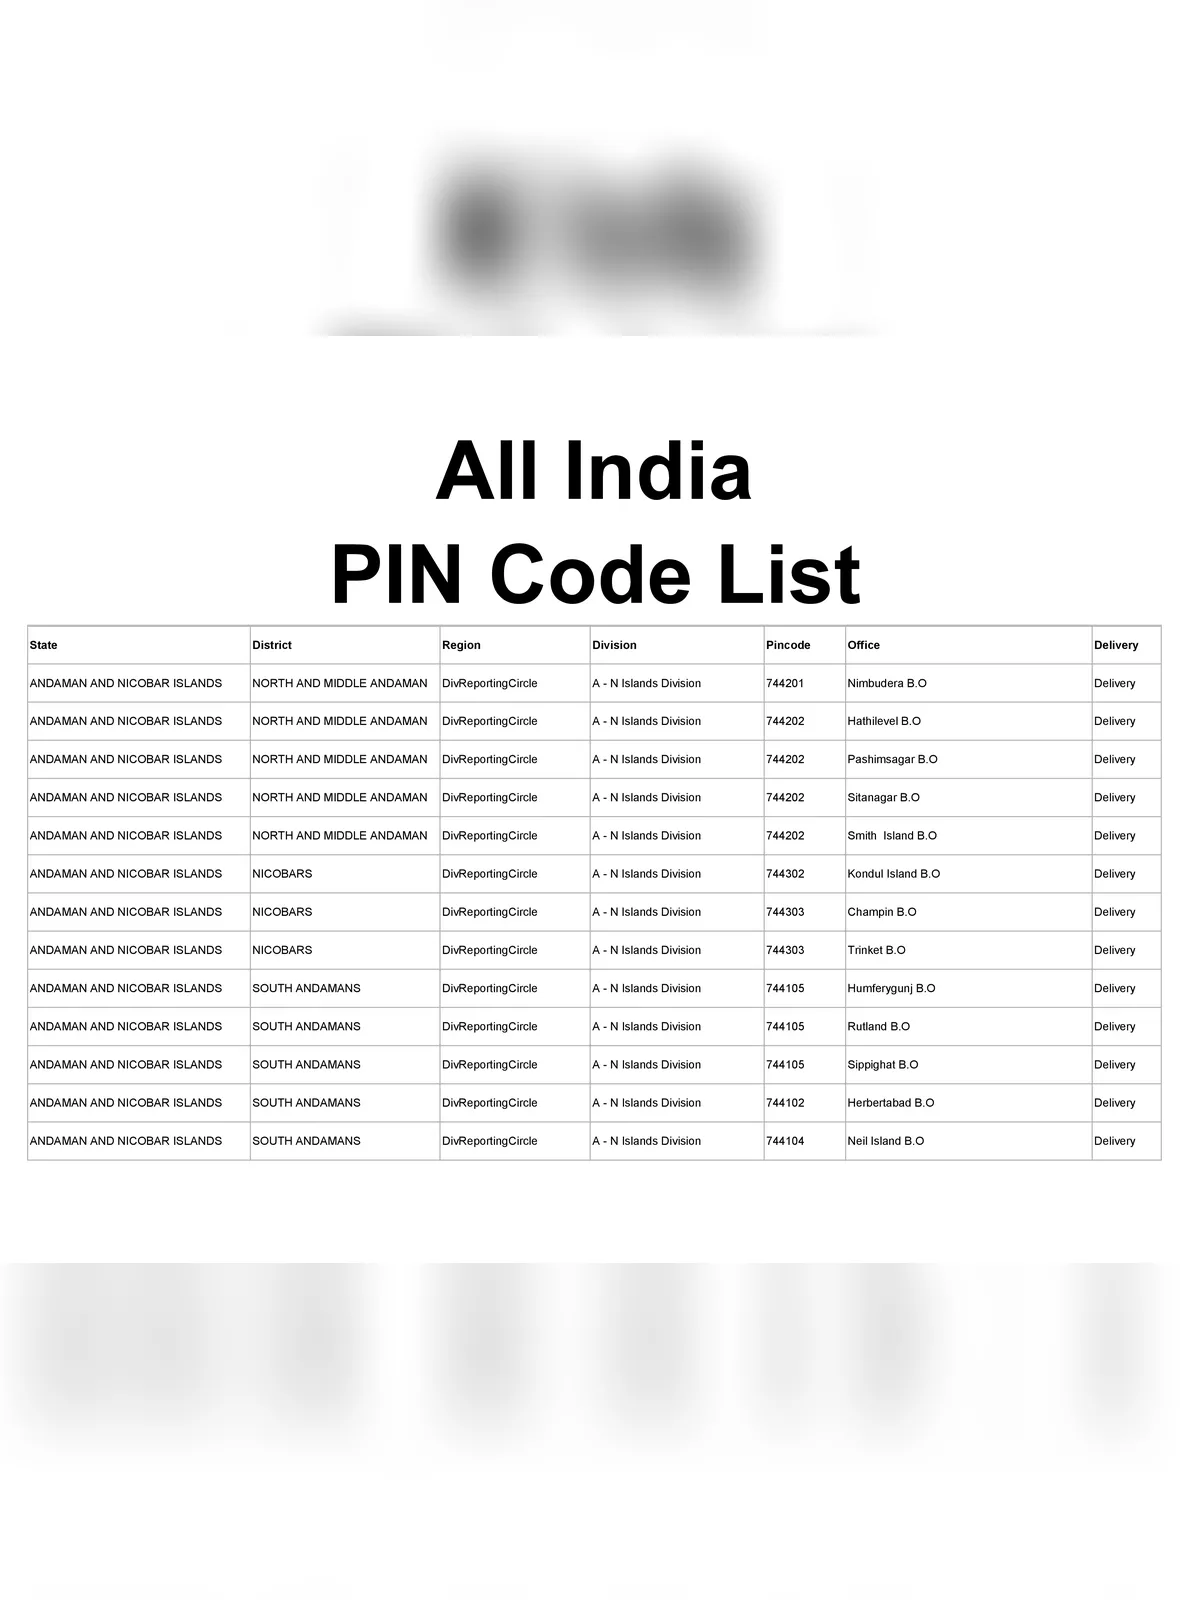 All India Pin Code List